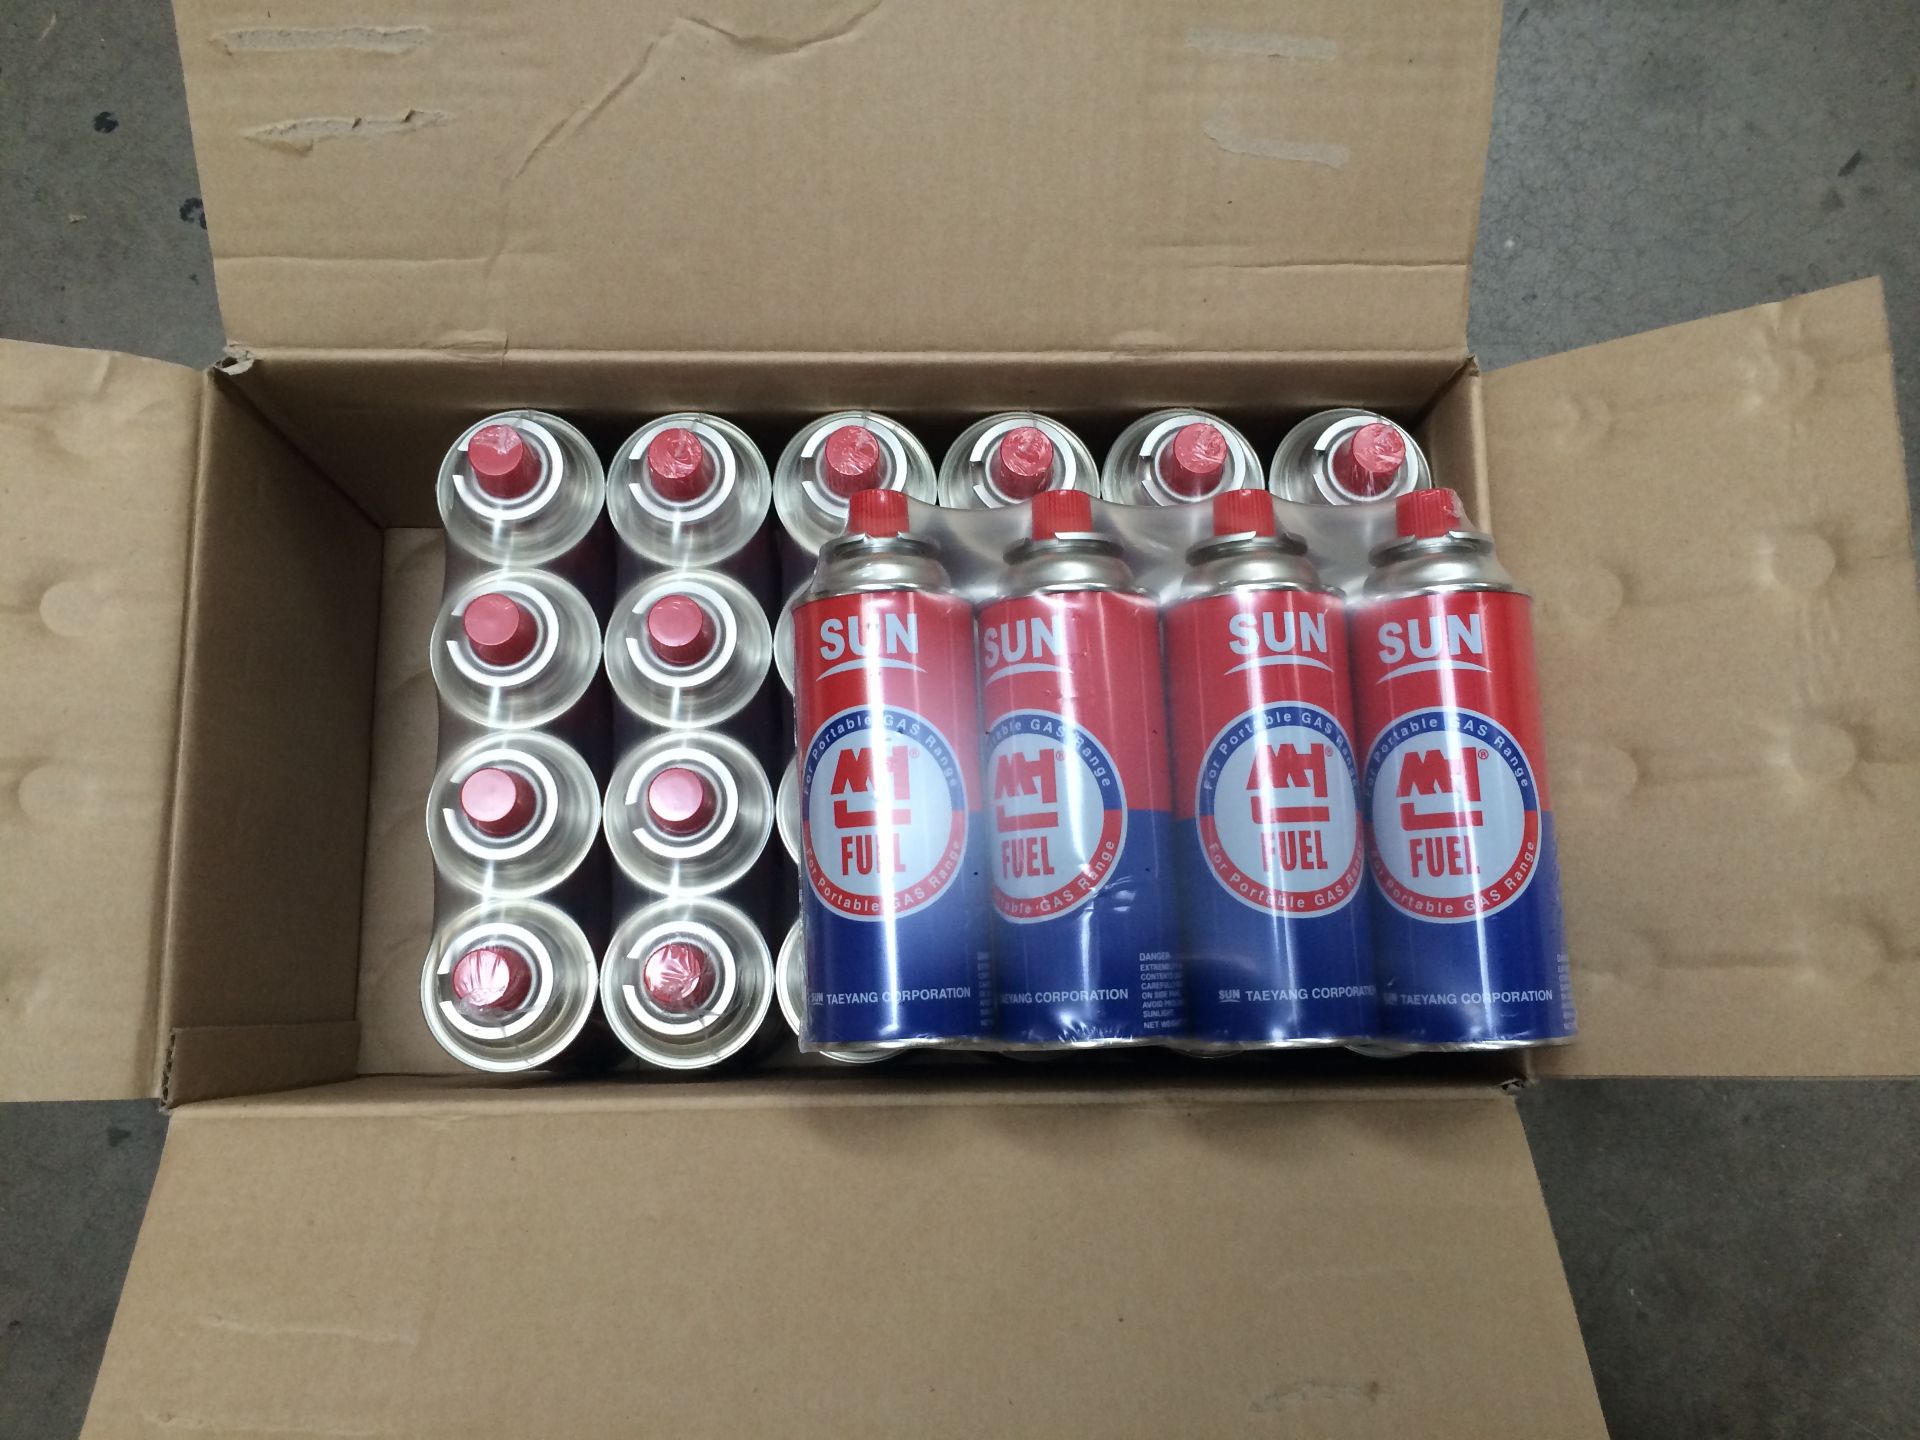 Box of 28 Cans of Butane Gas. BRAND NEW - QTY: 1 Each Canister is 220g - Flammable gas under